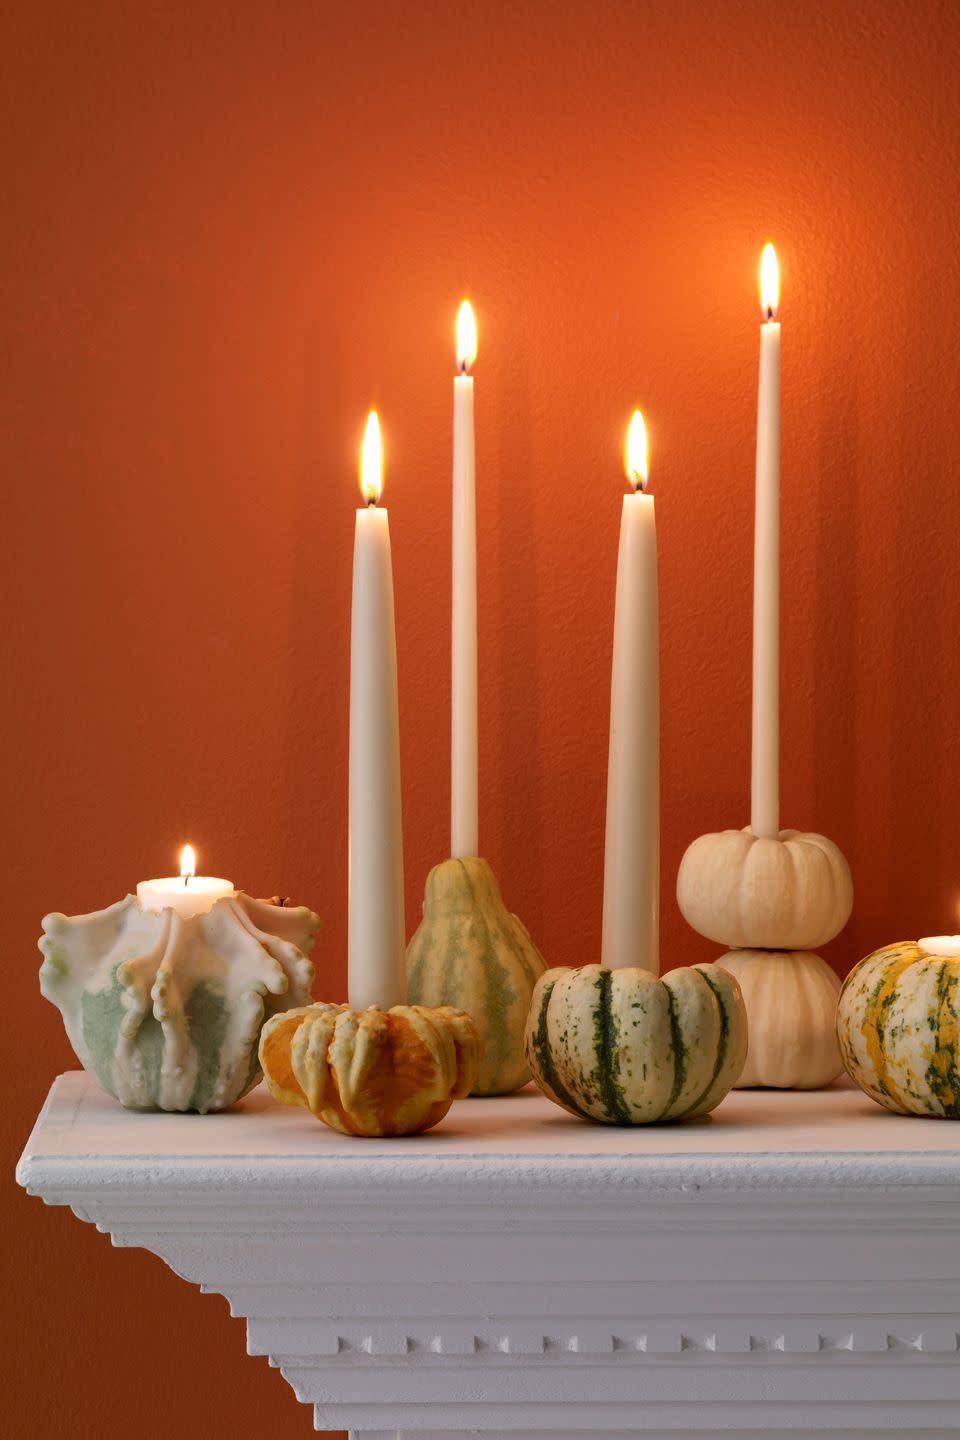 Autumnal taper holders made of real pumpkins and gourds.